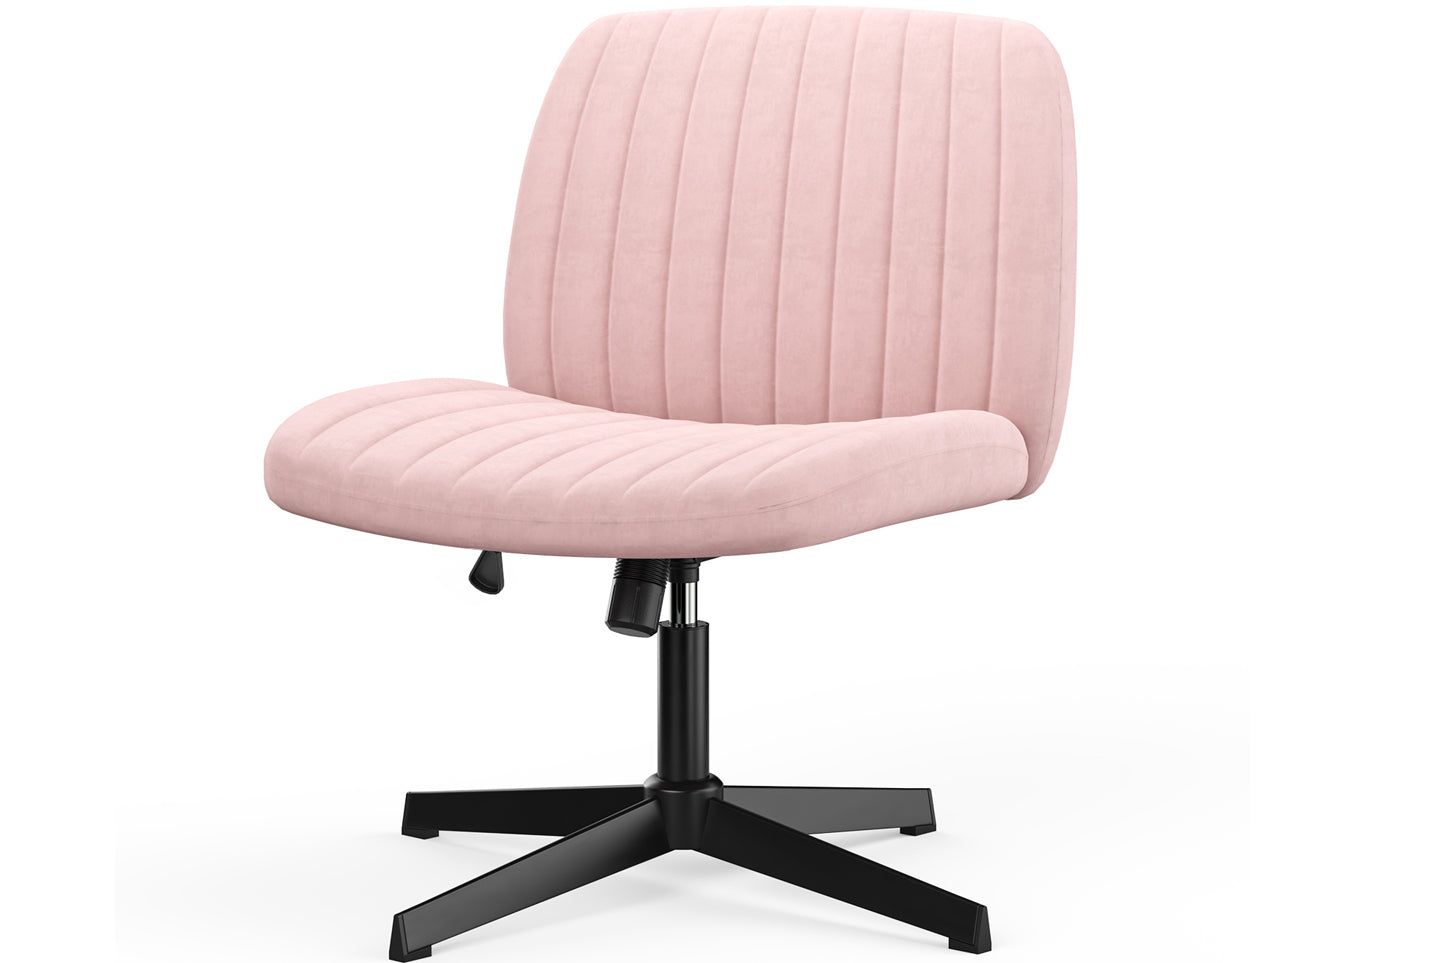 Ergonomic Cross Legged Office Chair Armless Wide Desk Chair with Mid Back Support for Home Office Bedroom Pink